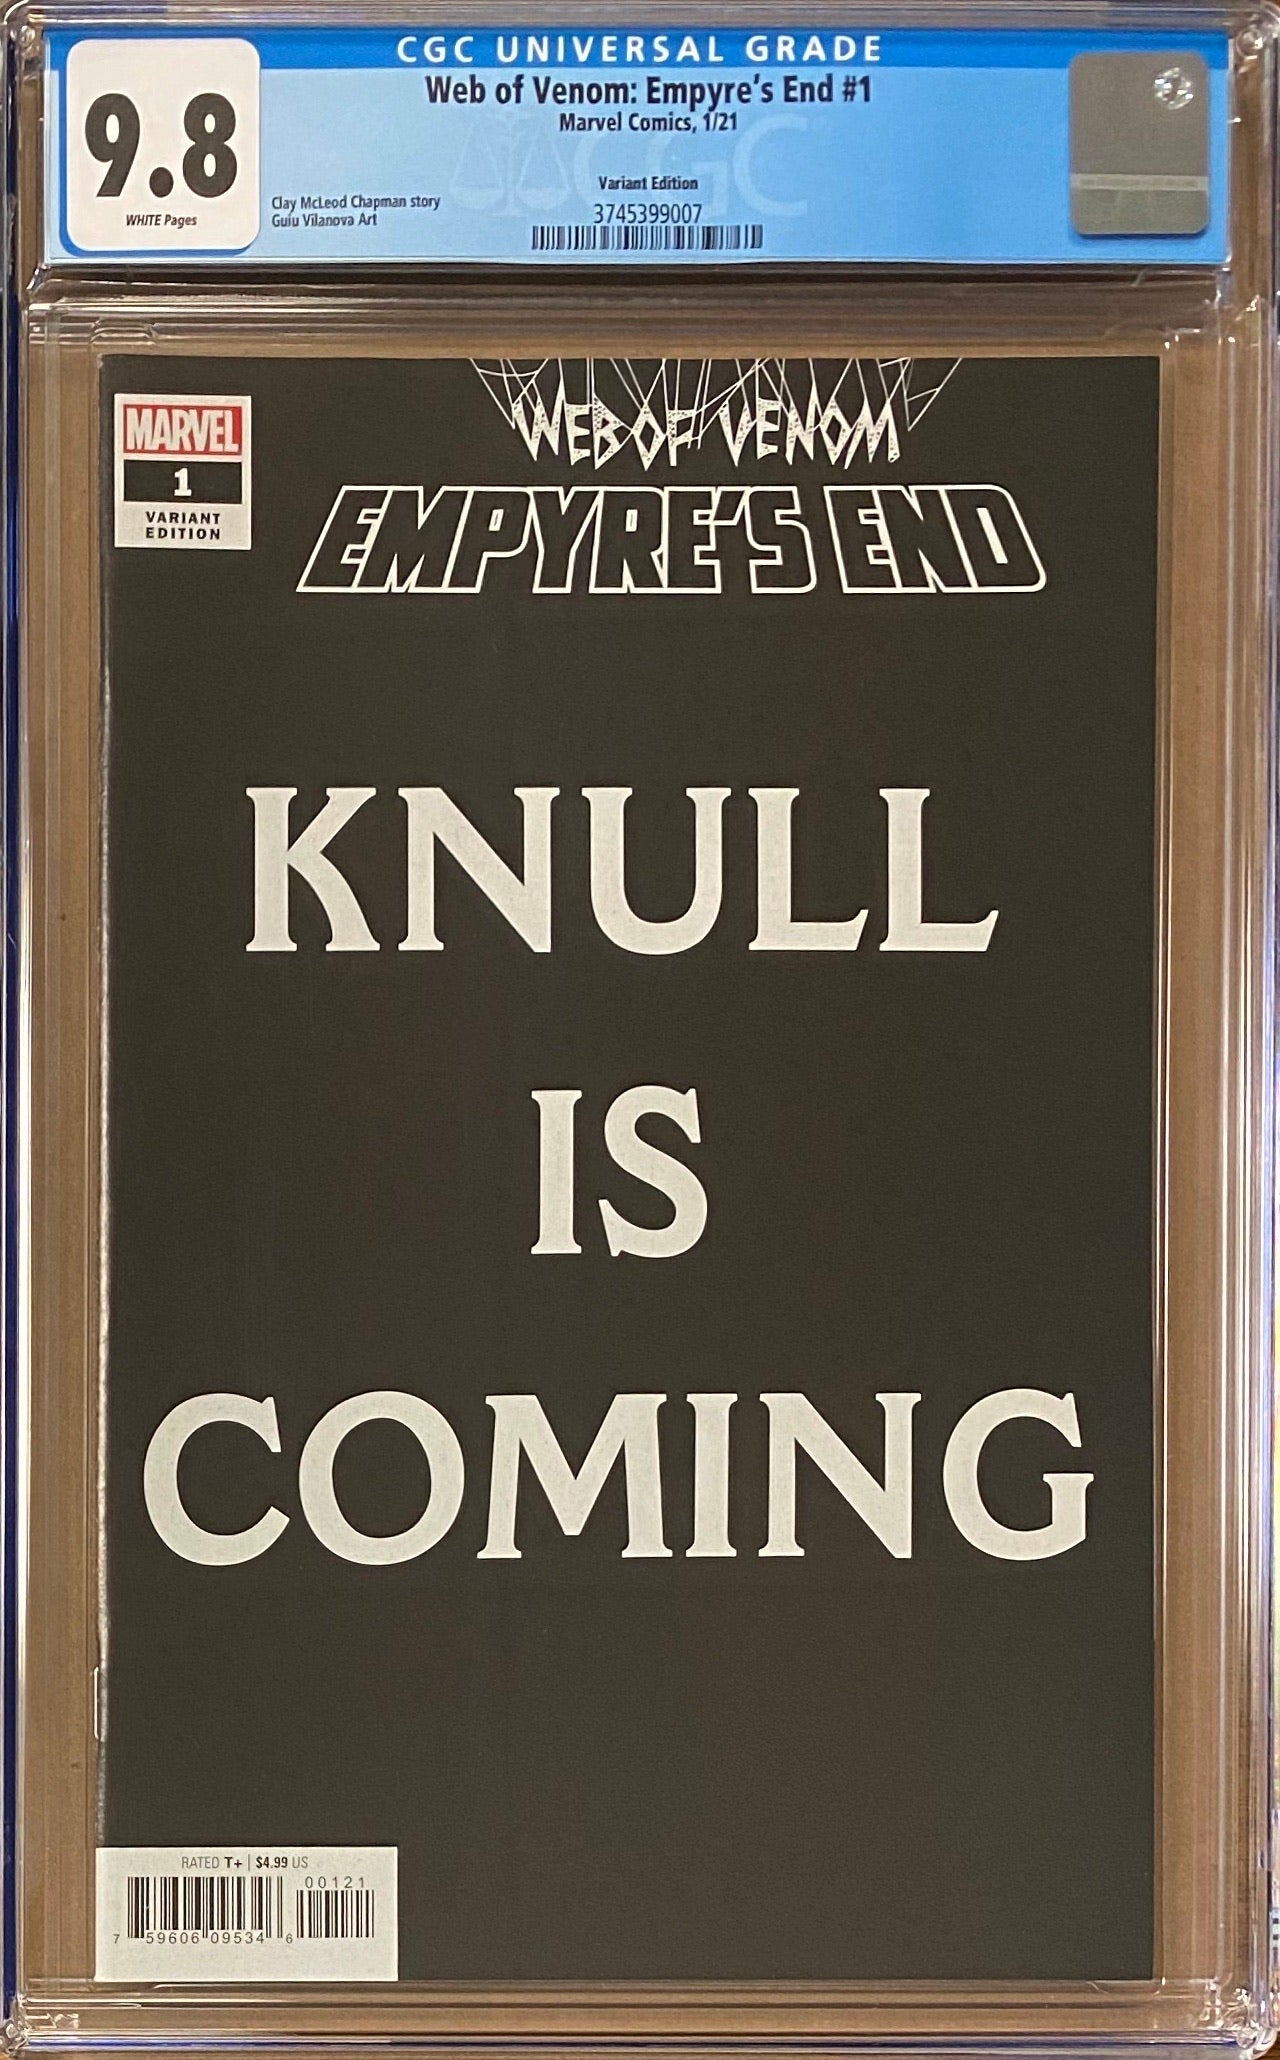 Web of Venom: Empyre's End #1 "Knull is Coming" Variant CGC 9.8